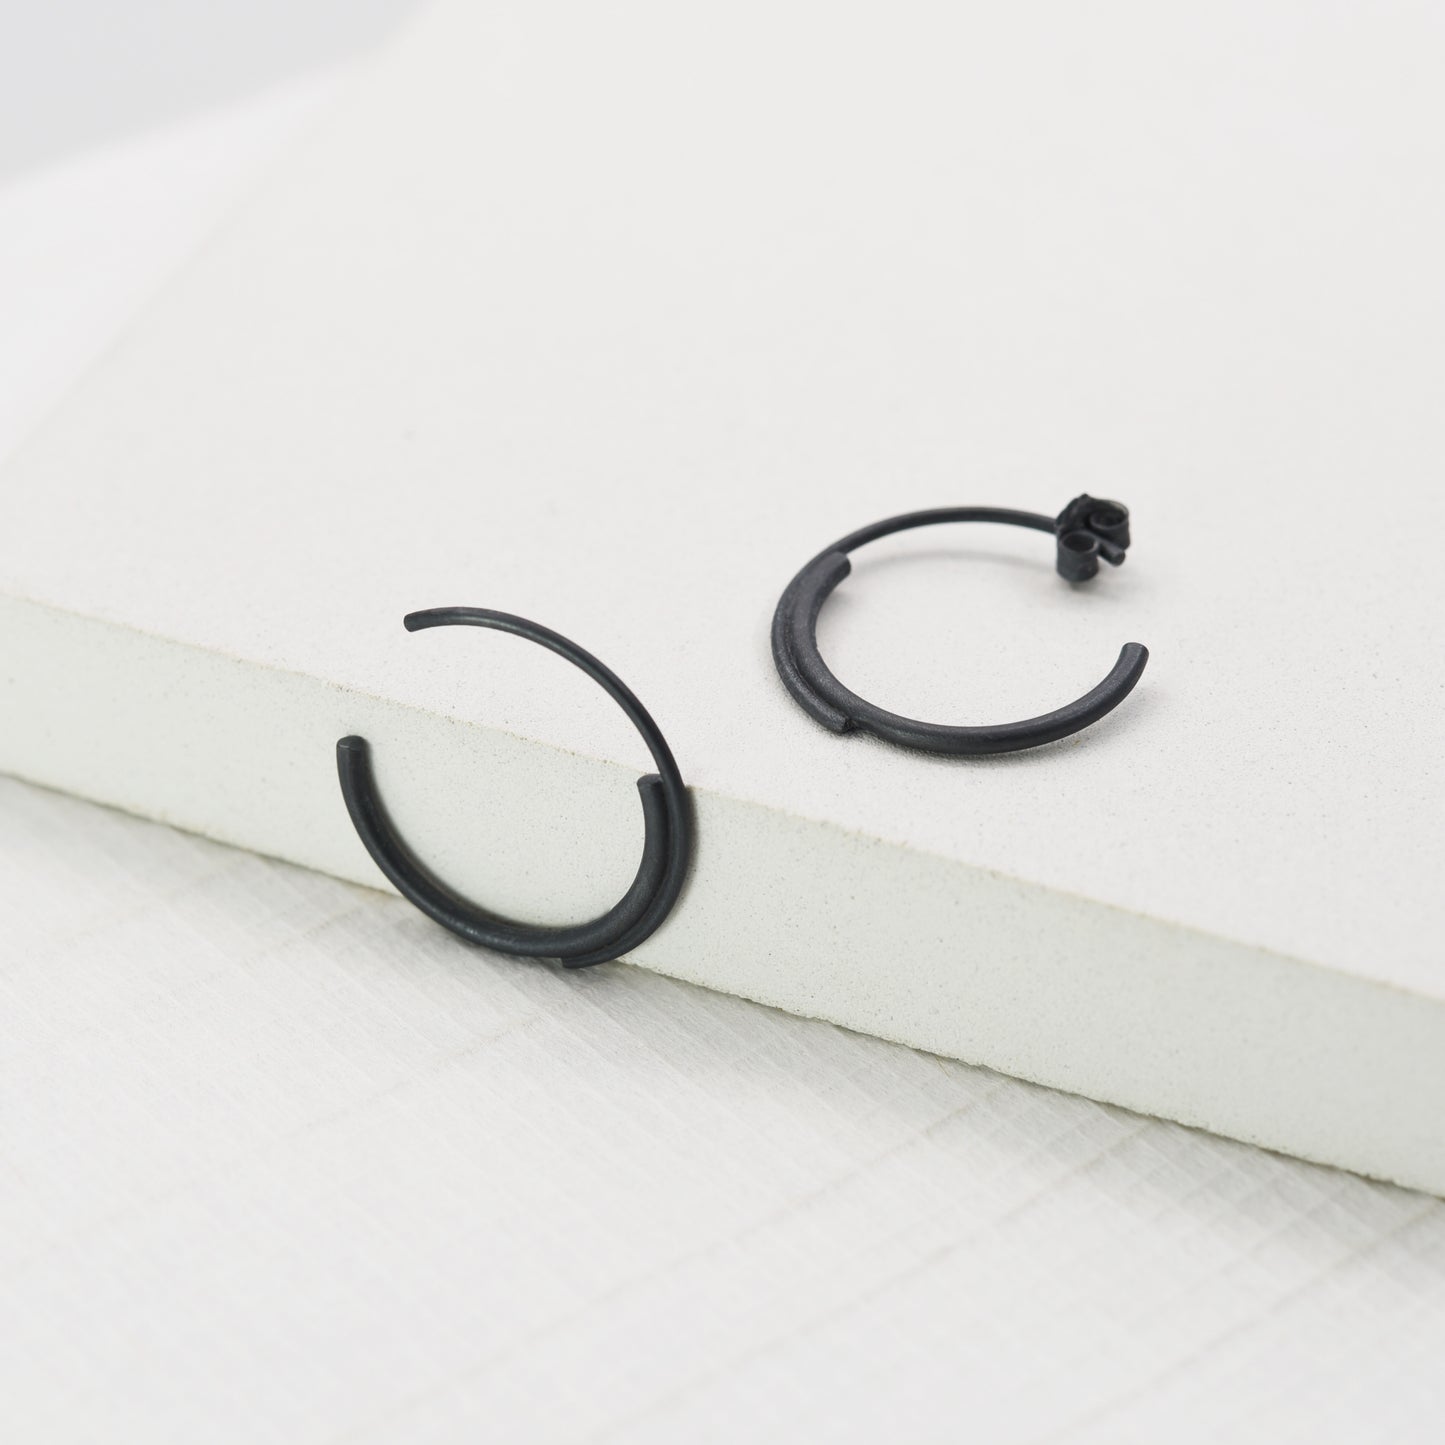 close up of a concentric circle small pair of hoops earrings in black oxidized silver in a white background